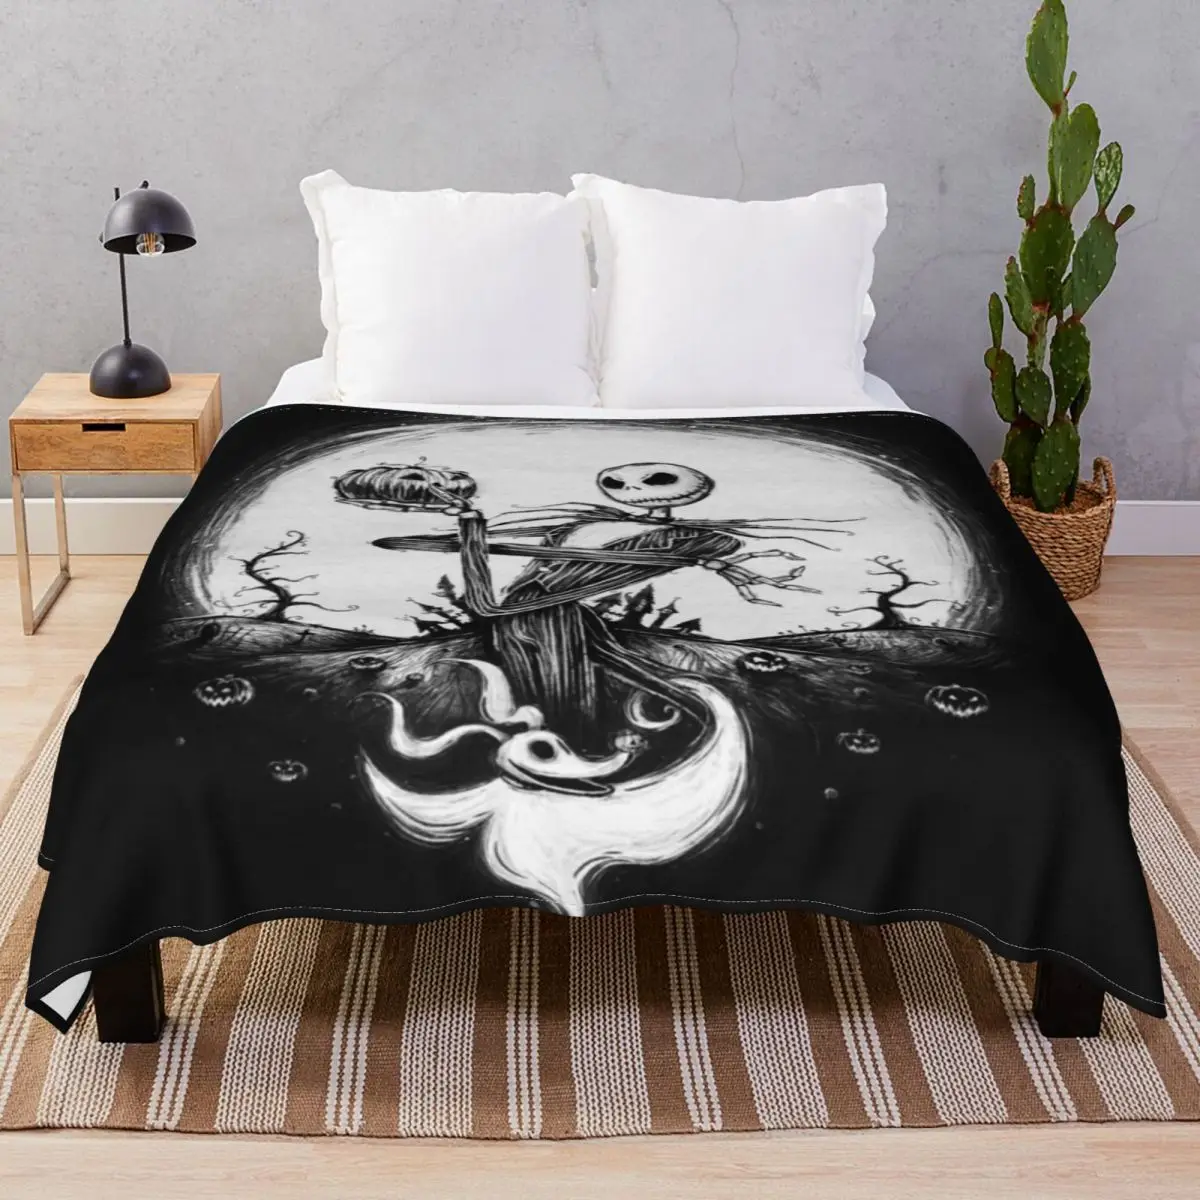 Halloween Tale Blanket Fleece All Season Warm Throw Blankets for Bedding Home Couch Travel Office